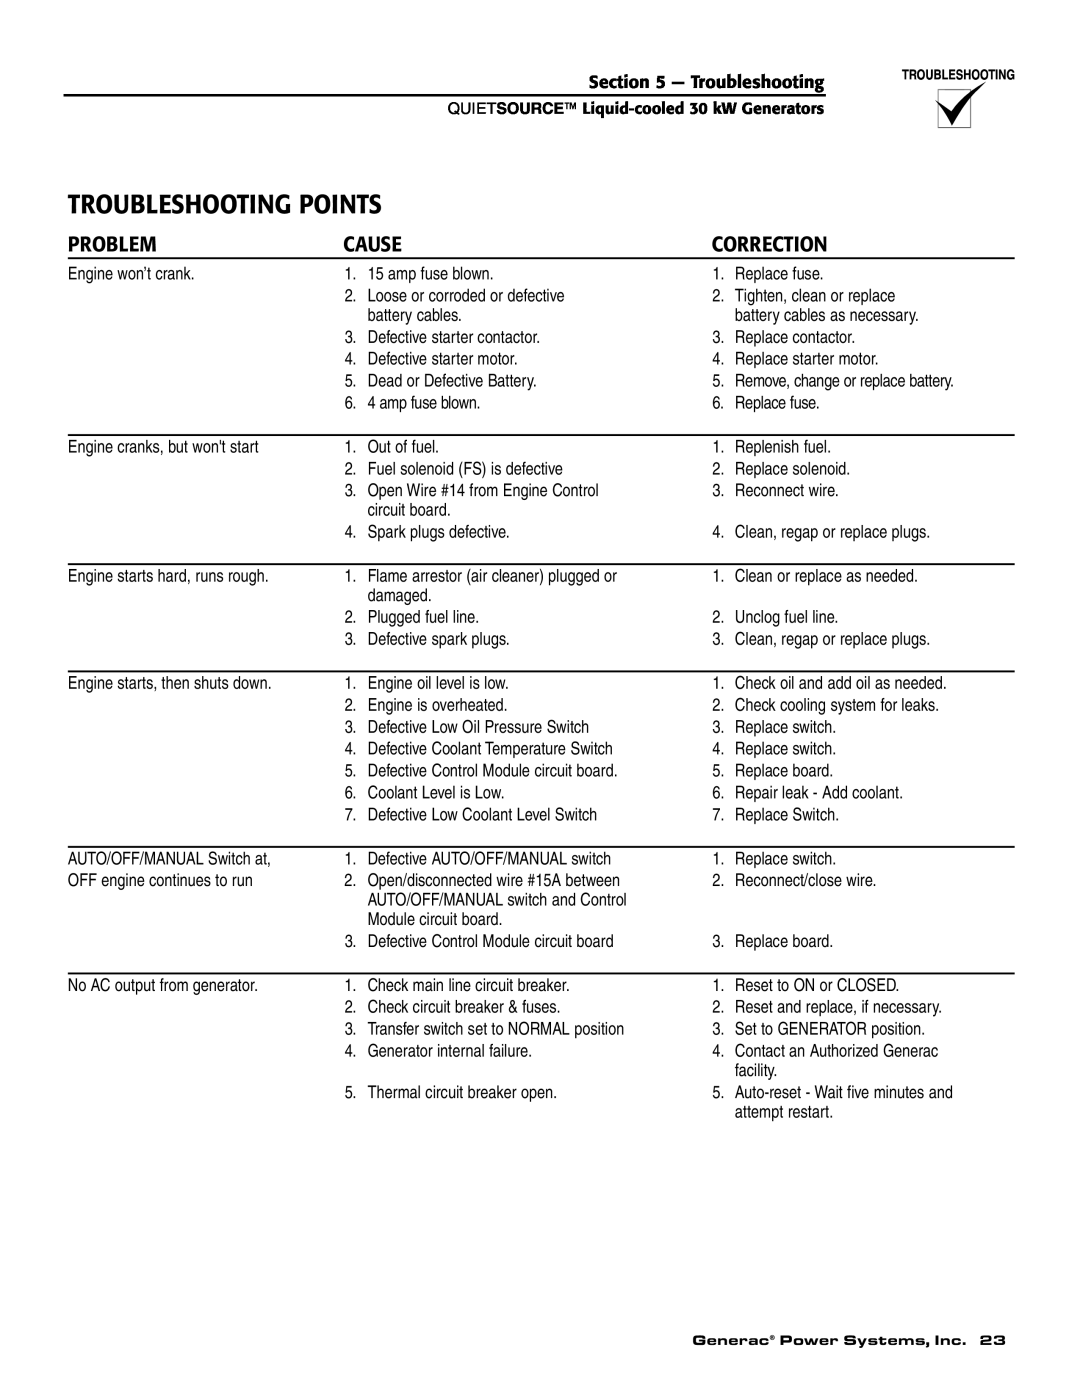 Generac Power Systems 004917-3 owner manual Troubleshooting Points, Problem, Cause, Correction 